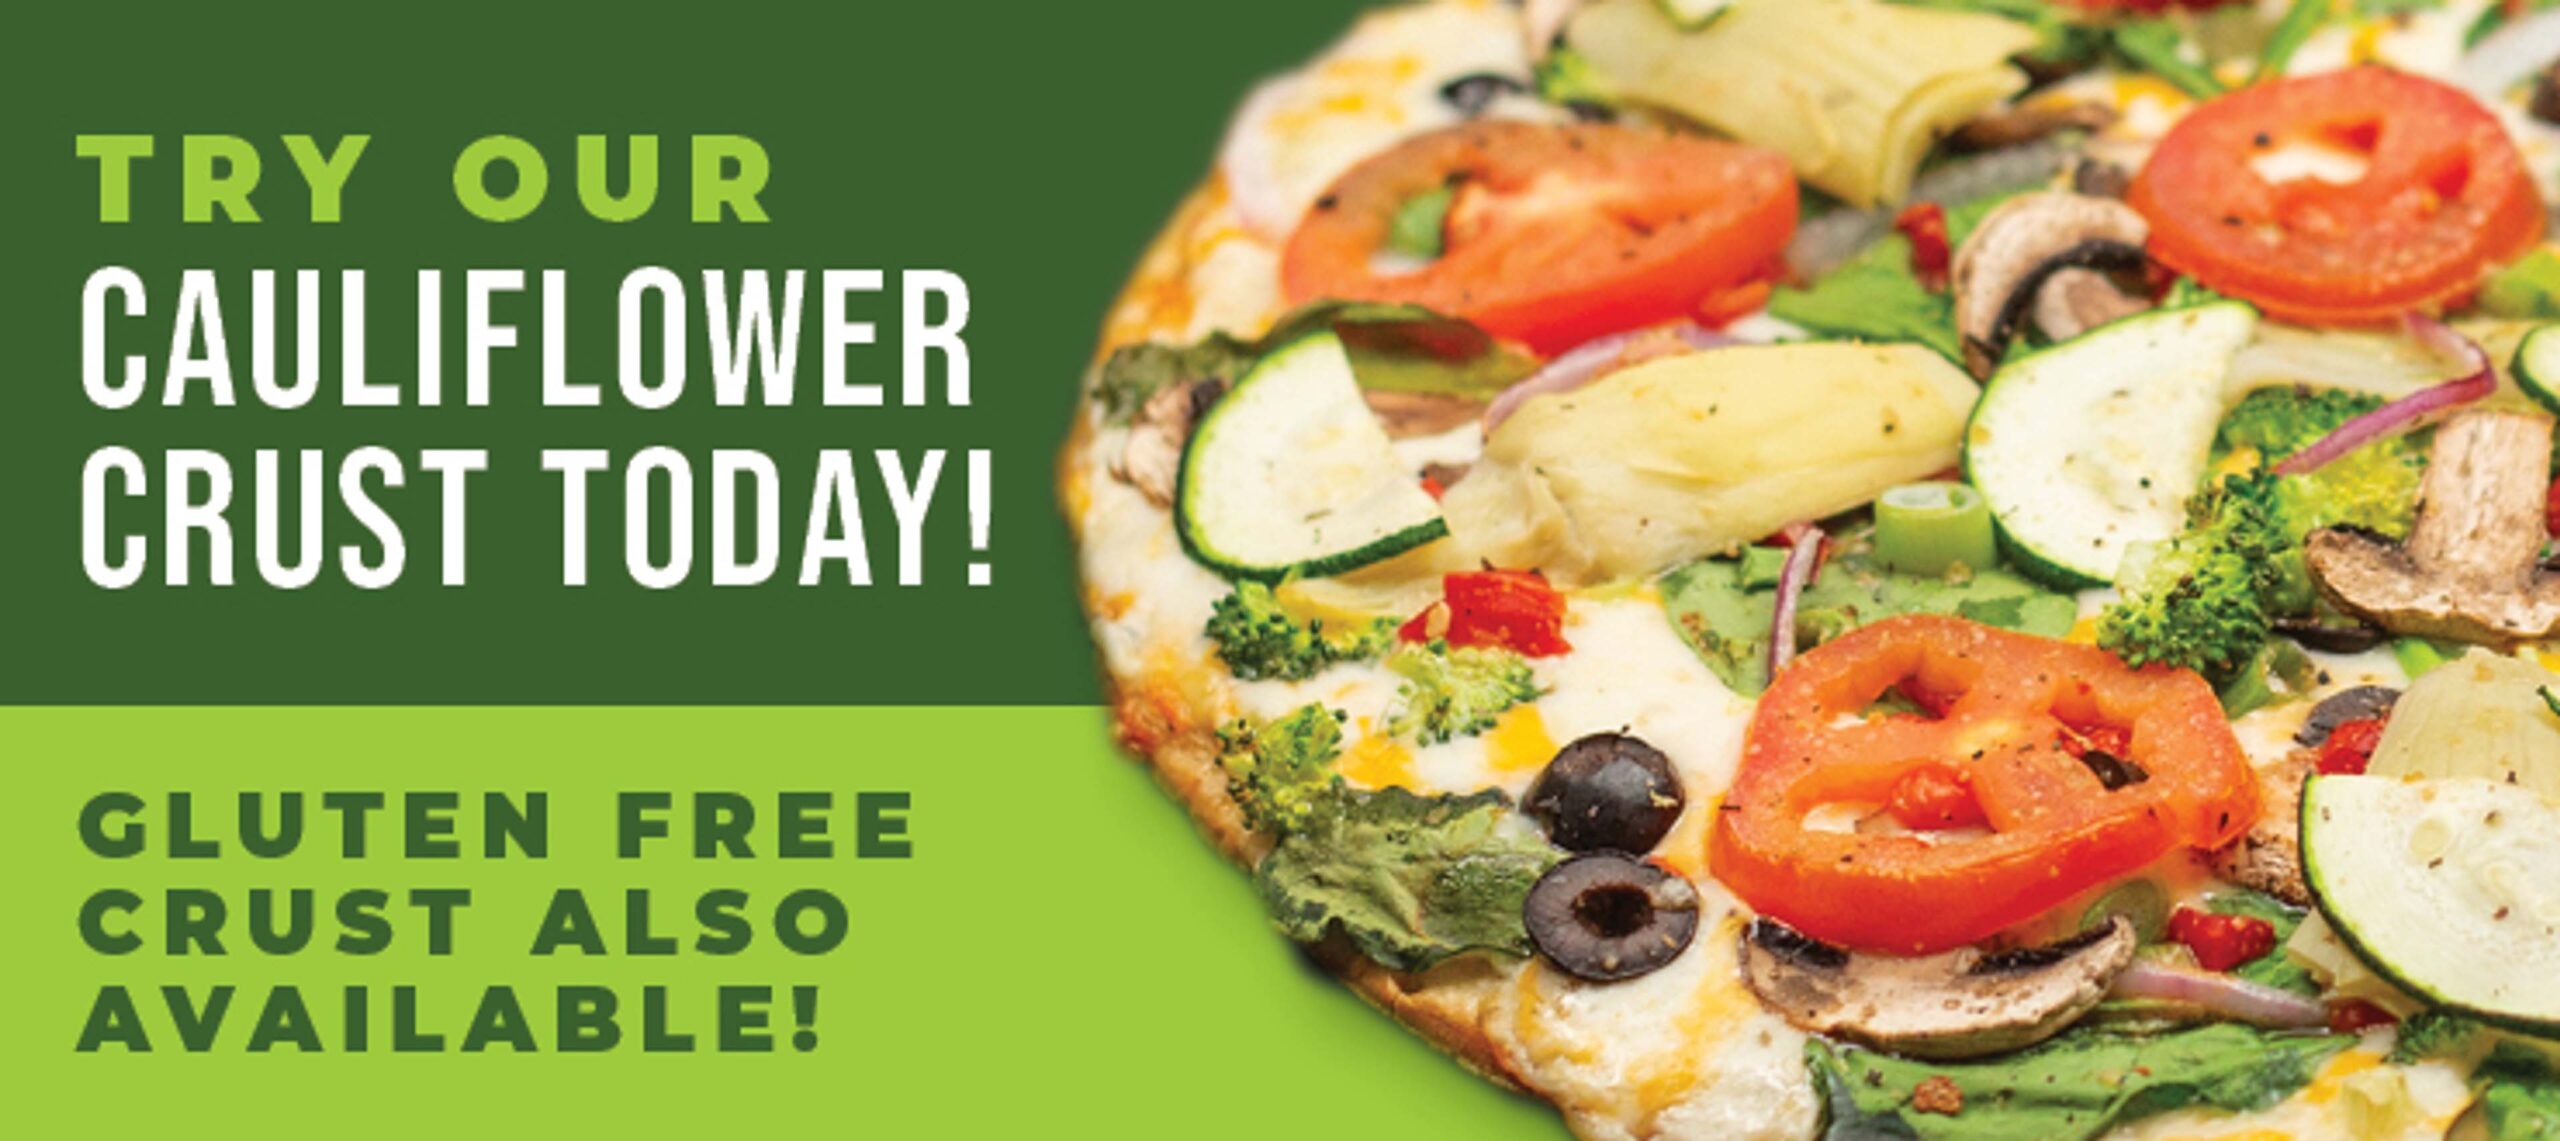 Try our cauliflower crust today! Gluten free crust also available!